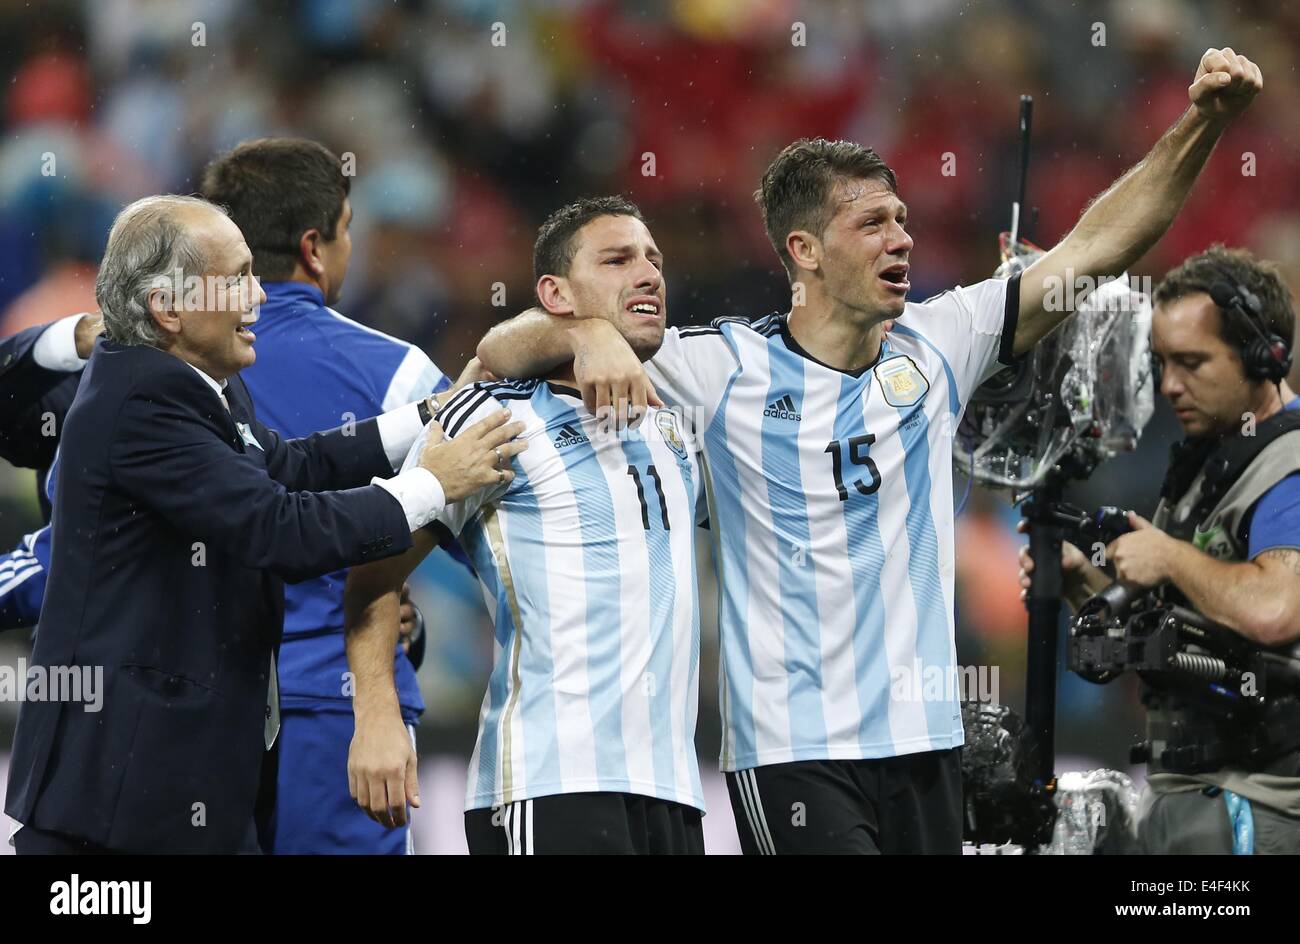 Sao Paulo, Brazil. 9th July, 2014. Argentina's Martin Demichelis, Maxi Rodriguez and coach Alejandro Sabella (R to L, front) celebrate their victory after a semifinal match between Netherlands and Argentina of 2014 FIFA World Cup at the Arena de Sao Paulo Stadium in Sao Paulo, Brazil, on July 9, 2014. Argentina won 4-2 on penalties over Netherlands after a 0-0 tie and qualified for the final on Wednesday. Credit:  Wang Lili/Xinhua/Alamy Live News Stock Photo